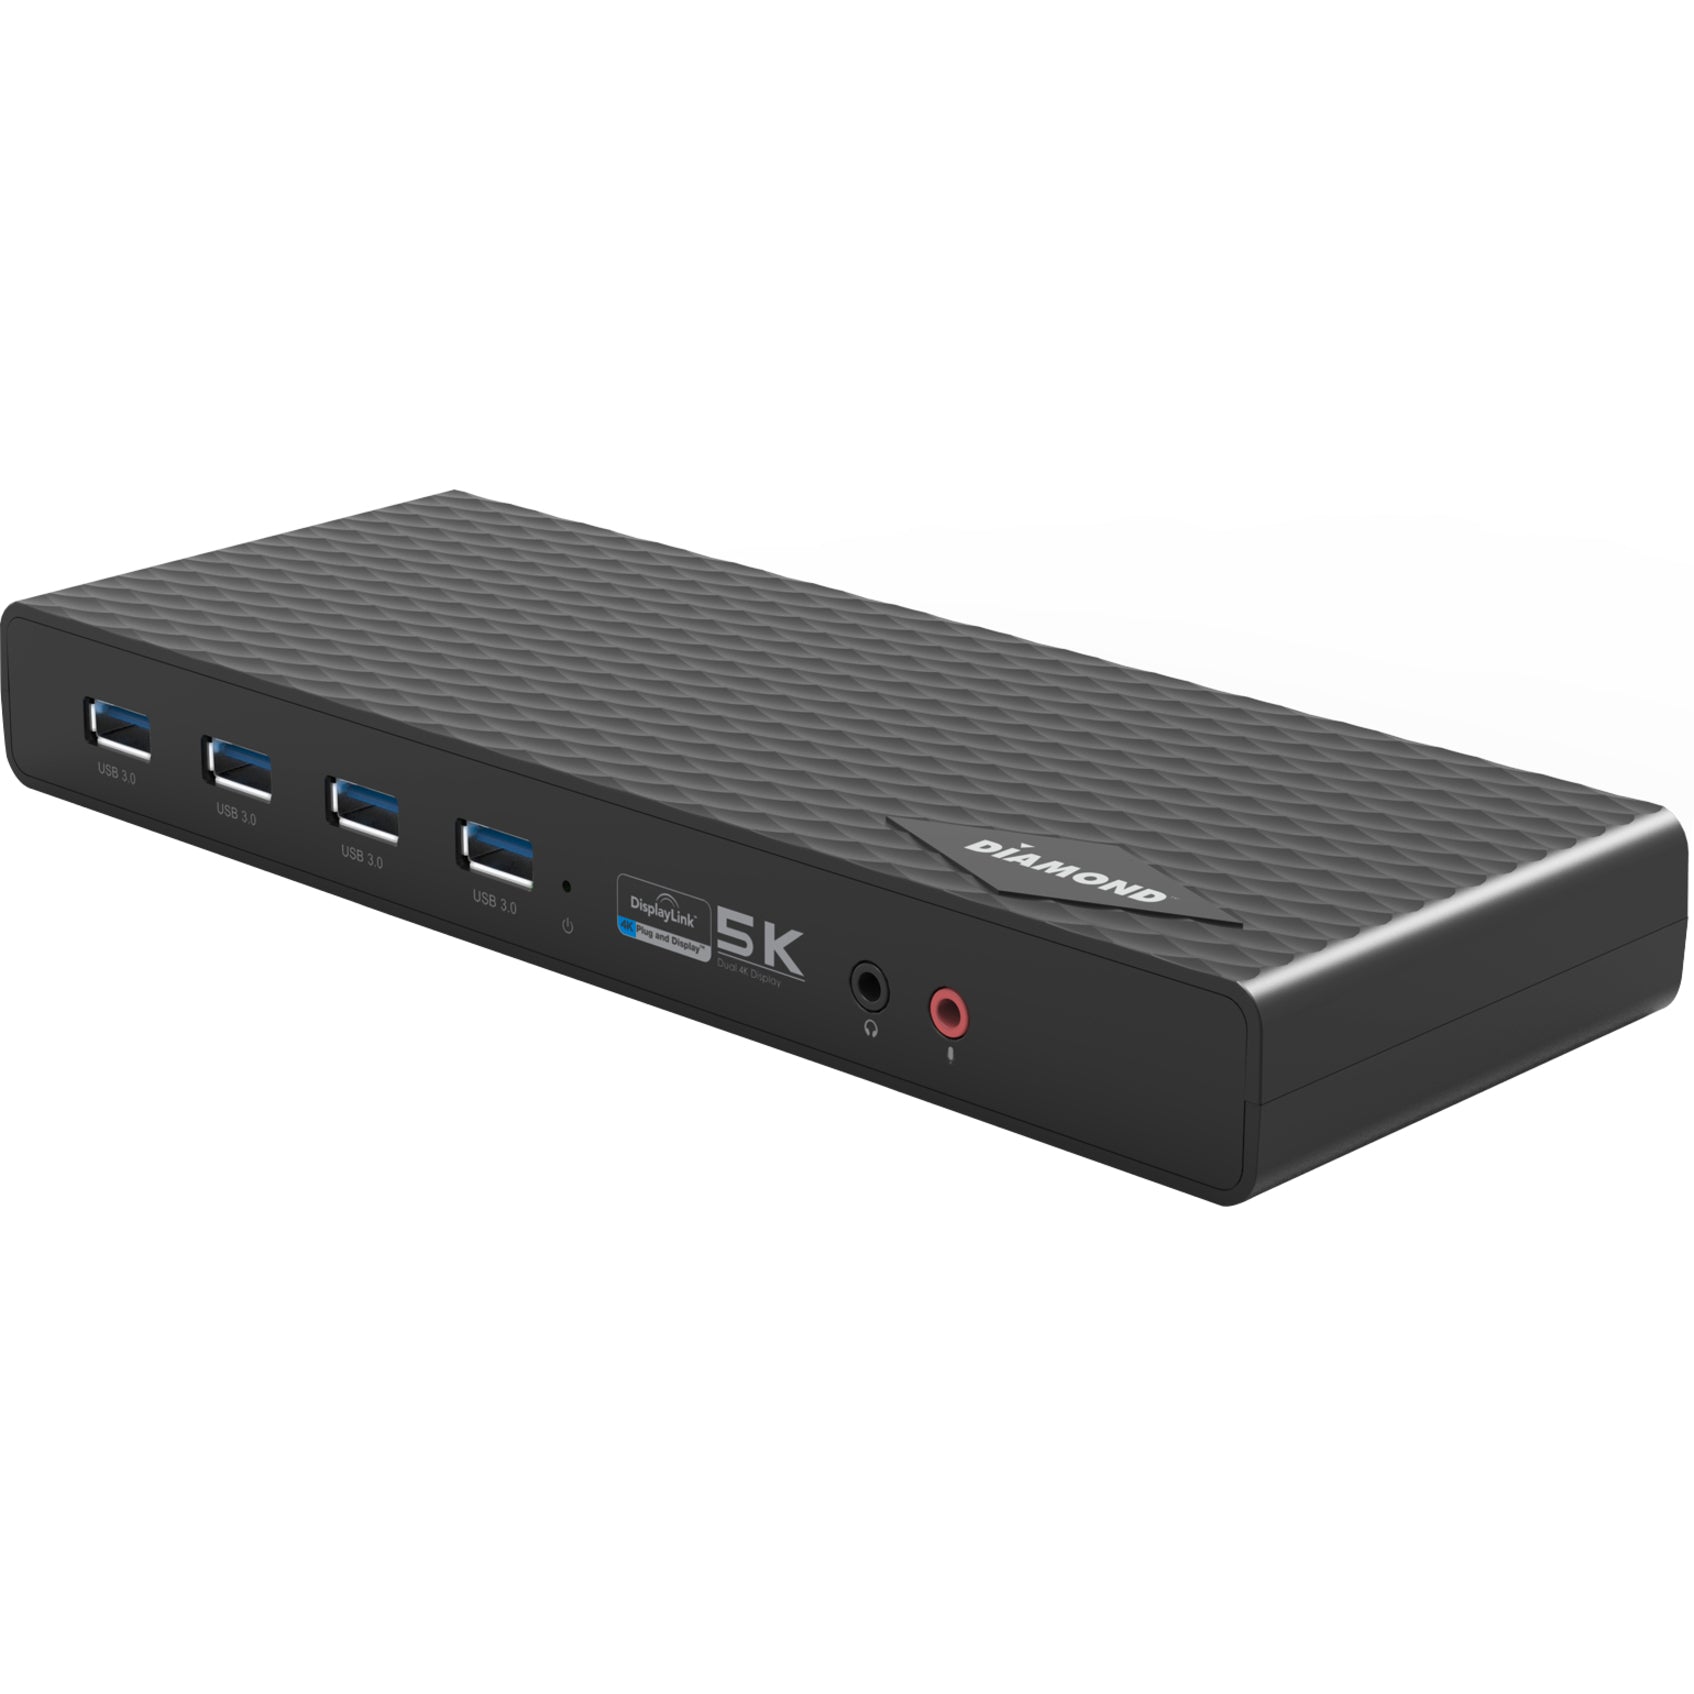 DIAMOND DS6950 Ultra Dock Docking Station, 4K/5K, Type-C and Type-A Compatibility